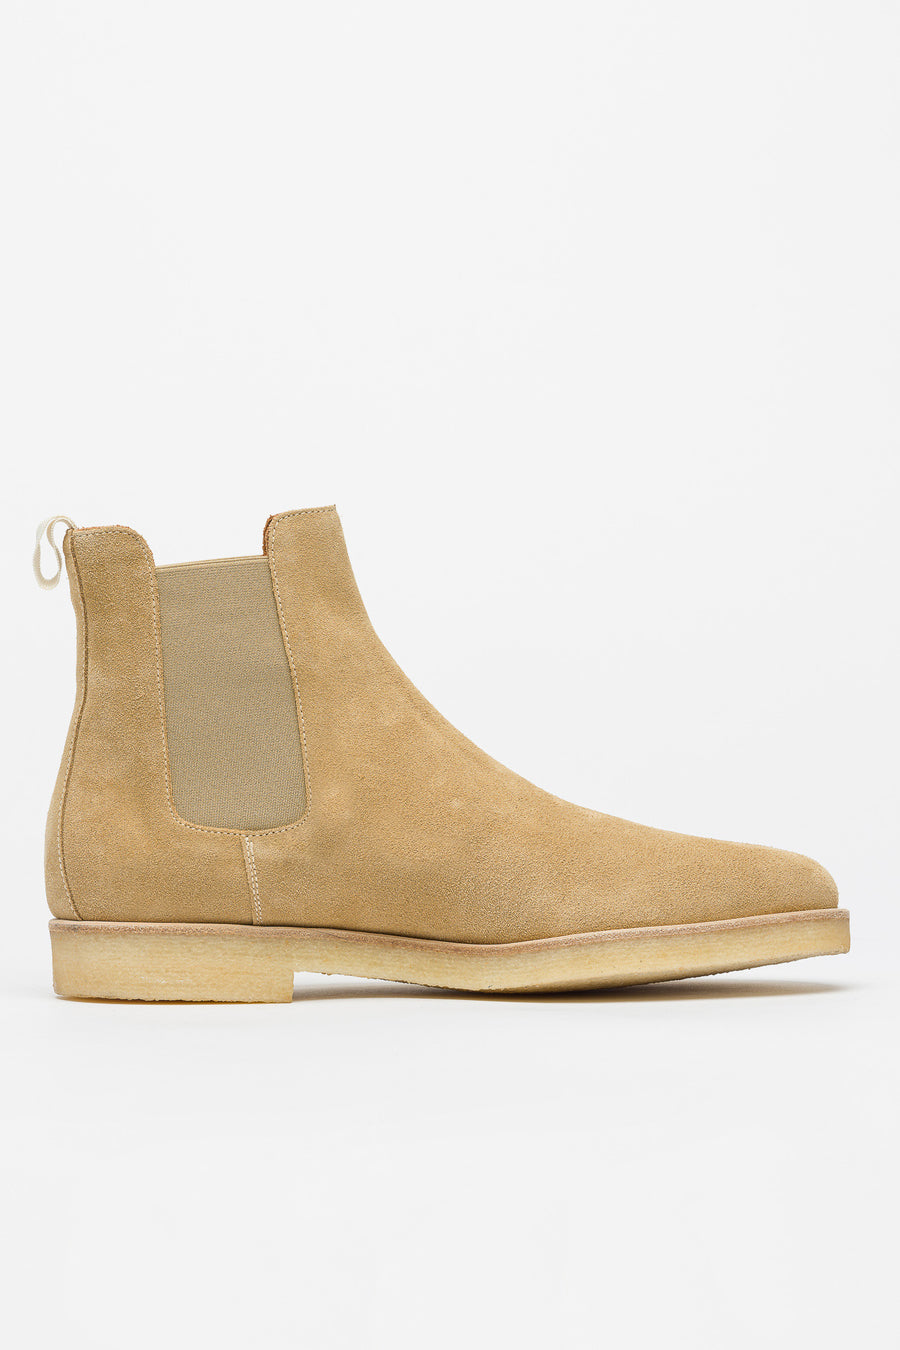 common projects grey suede chelsea boots